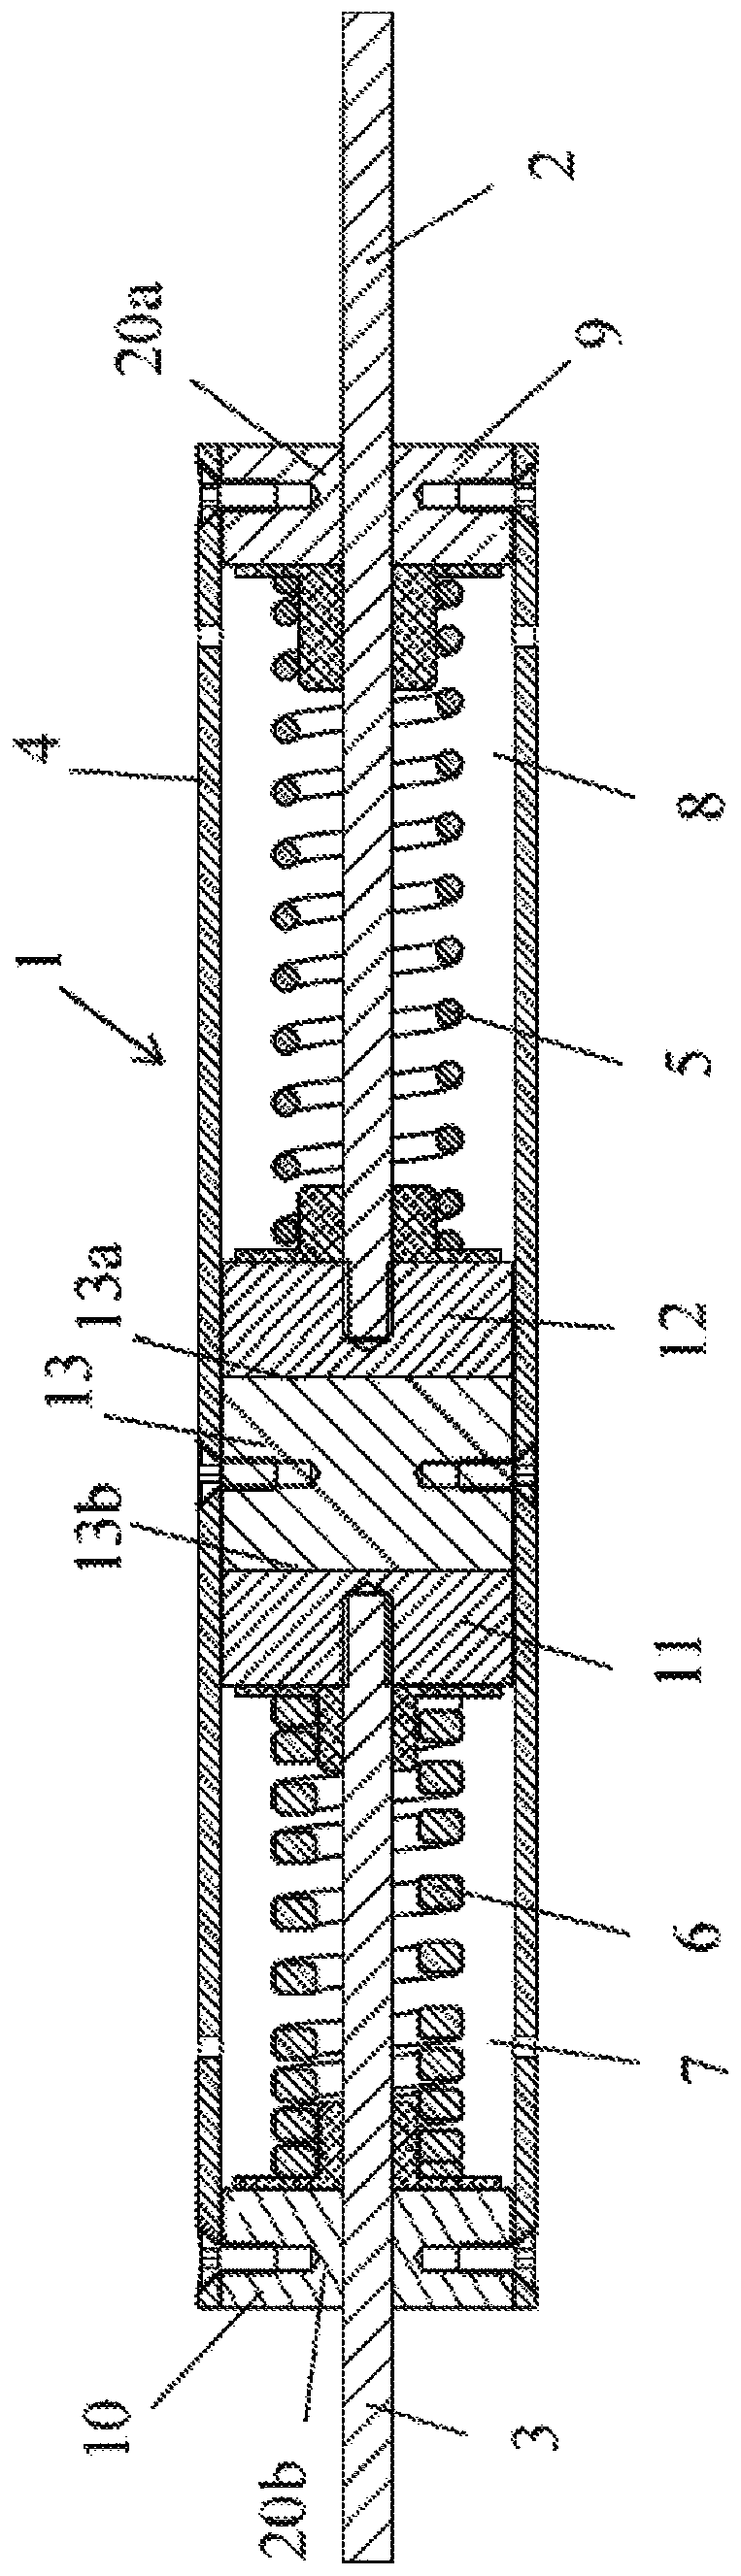 Bilinear Energy Dissipation and Shock Damping Devices for Steel Cables Under Tension